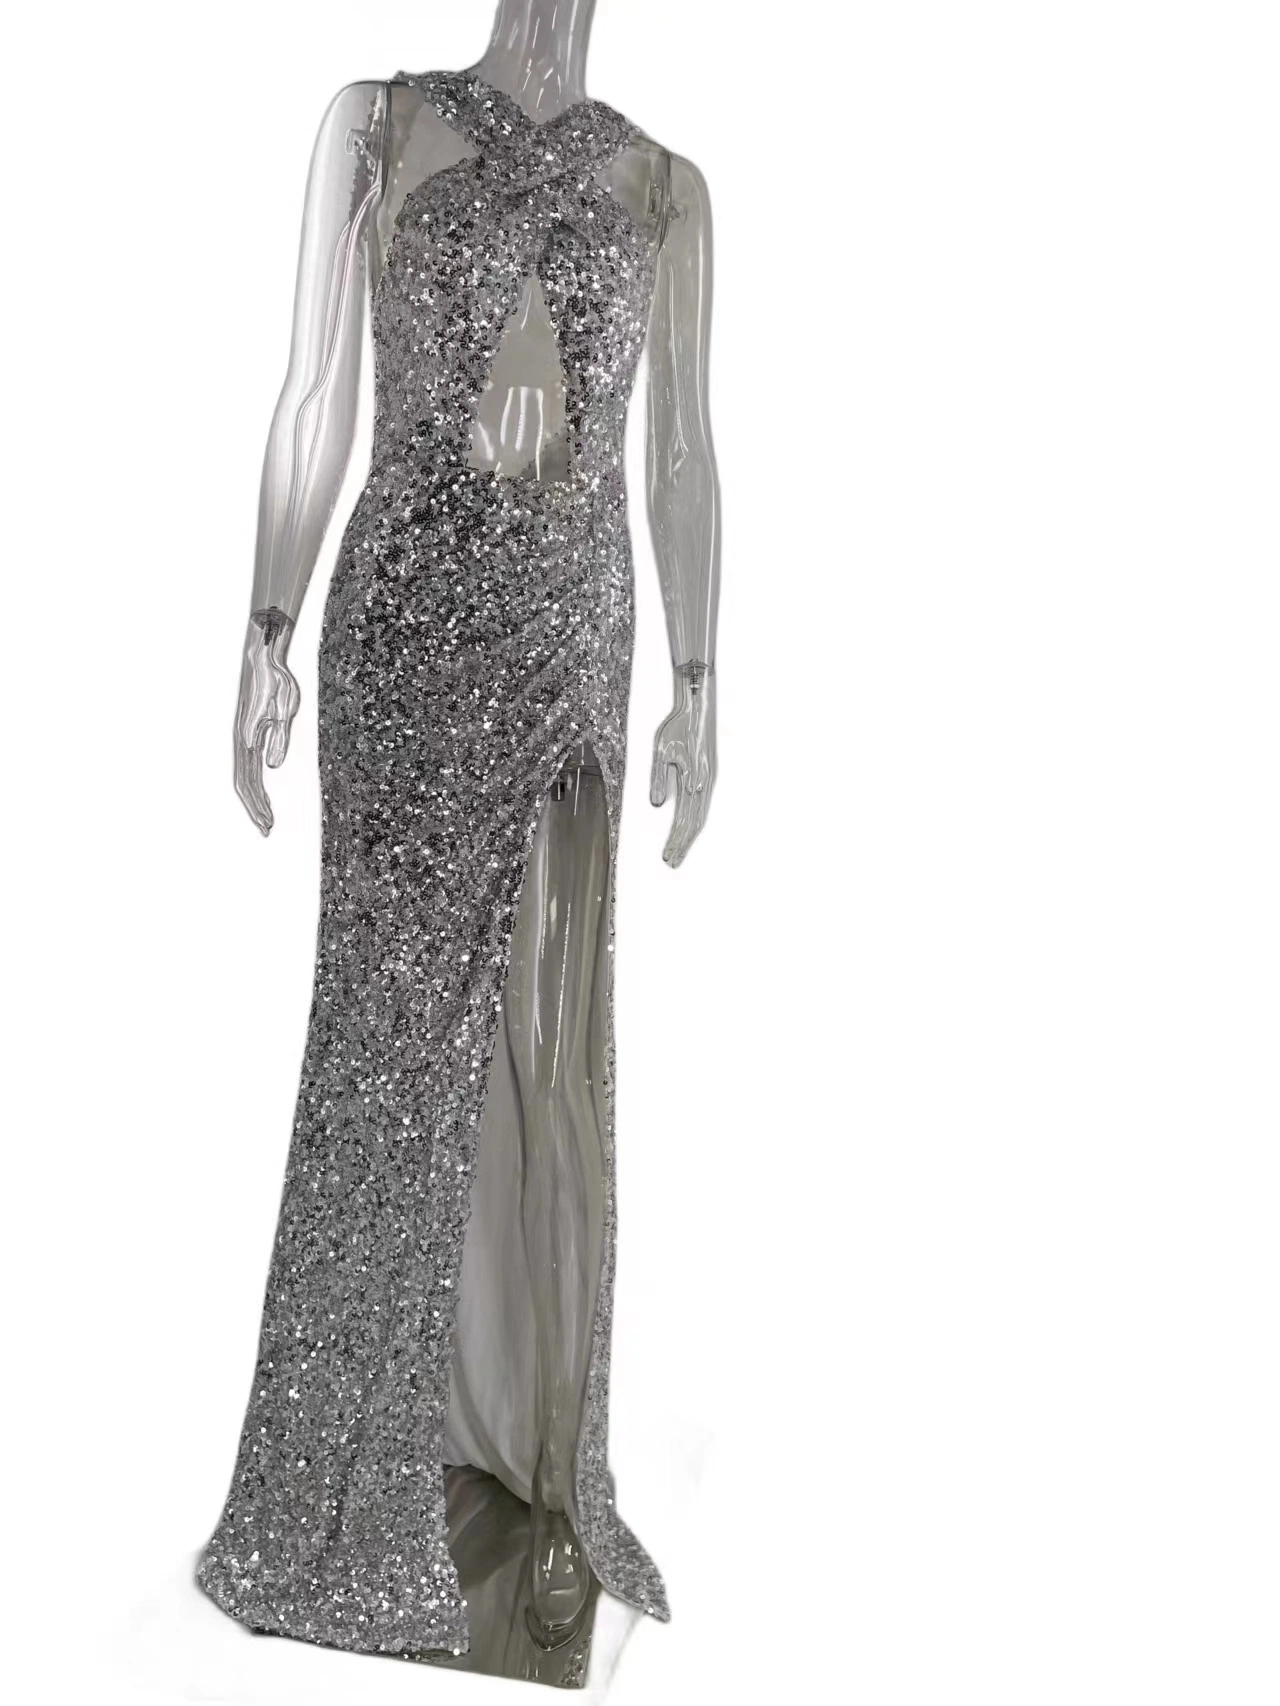 Silver Women's Split Backless Evening Dress Lady Fashion Sexy Long Party Gown